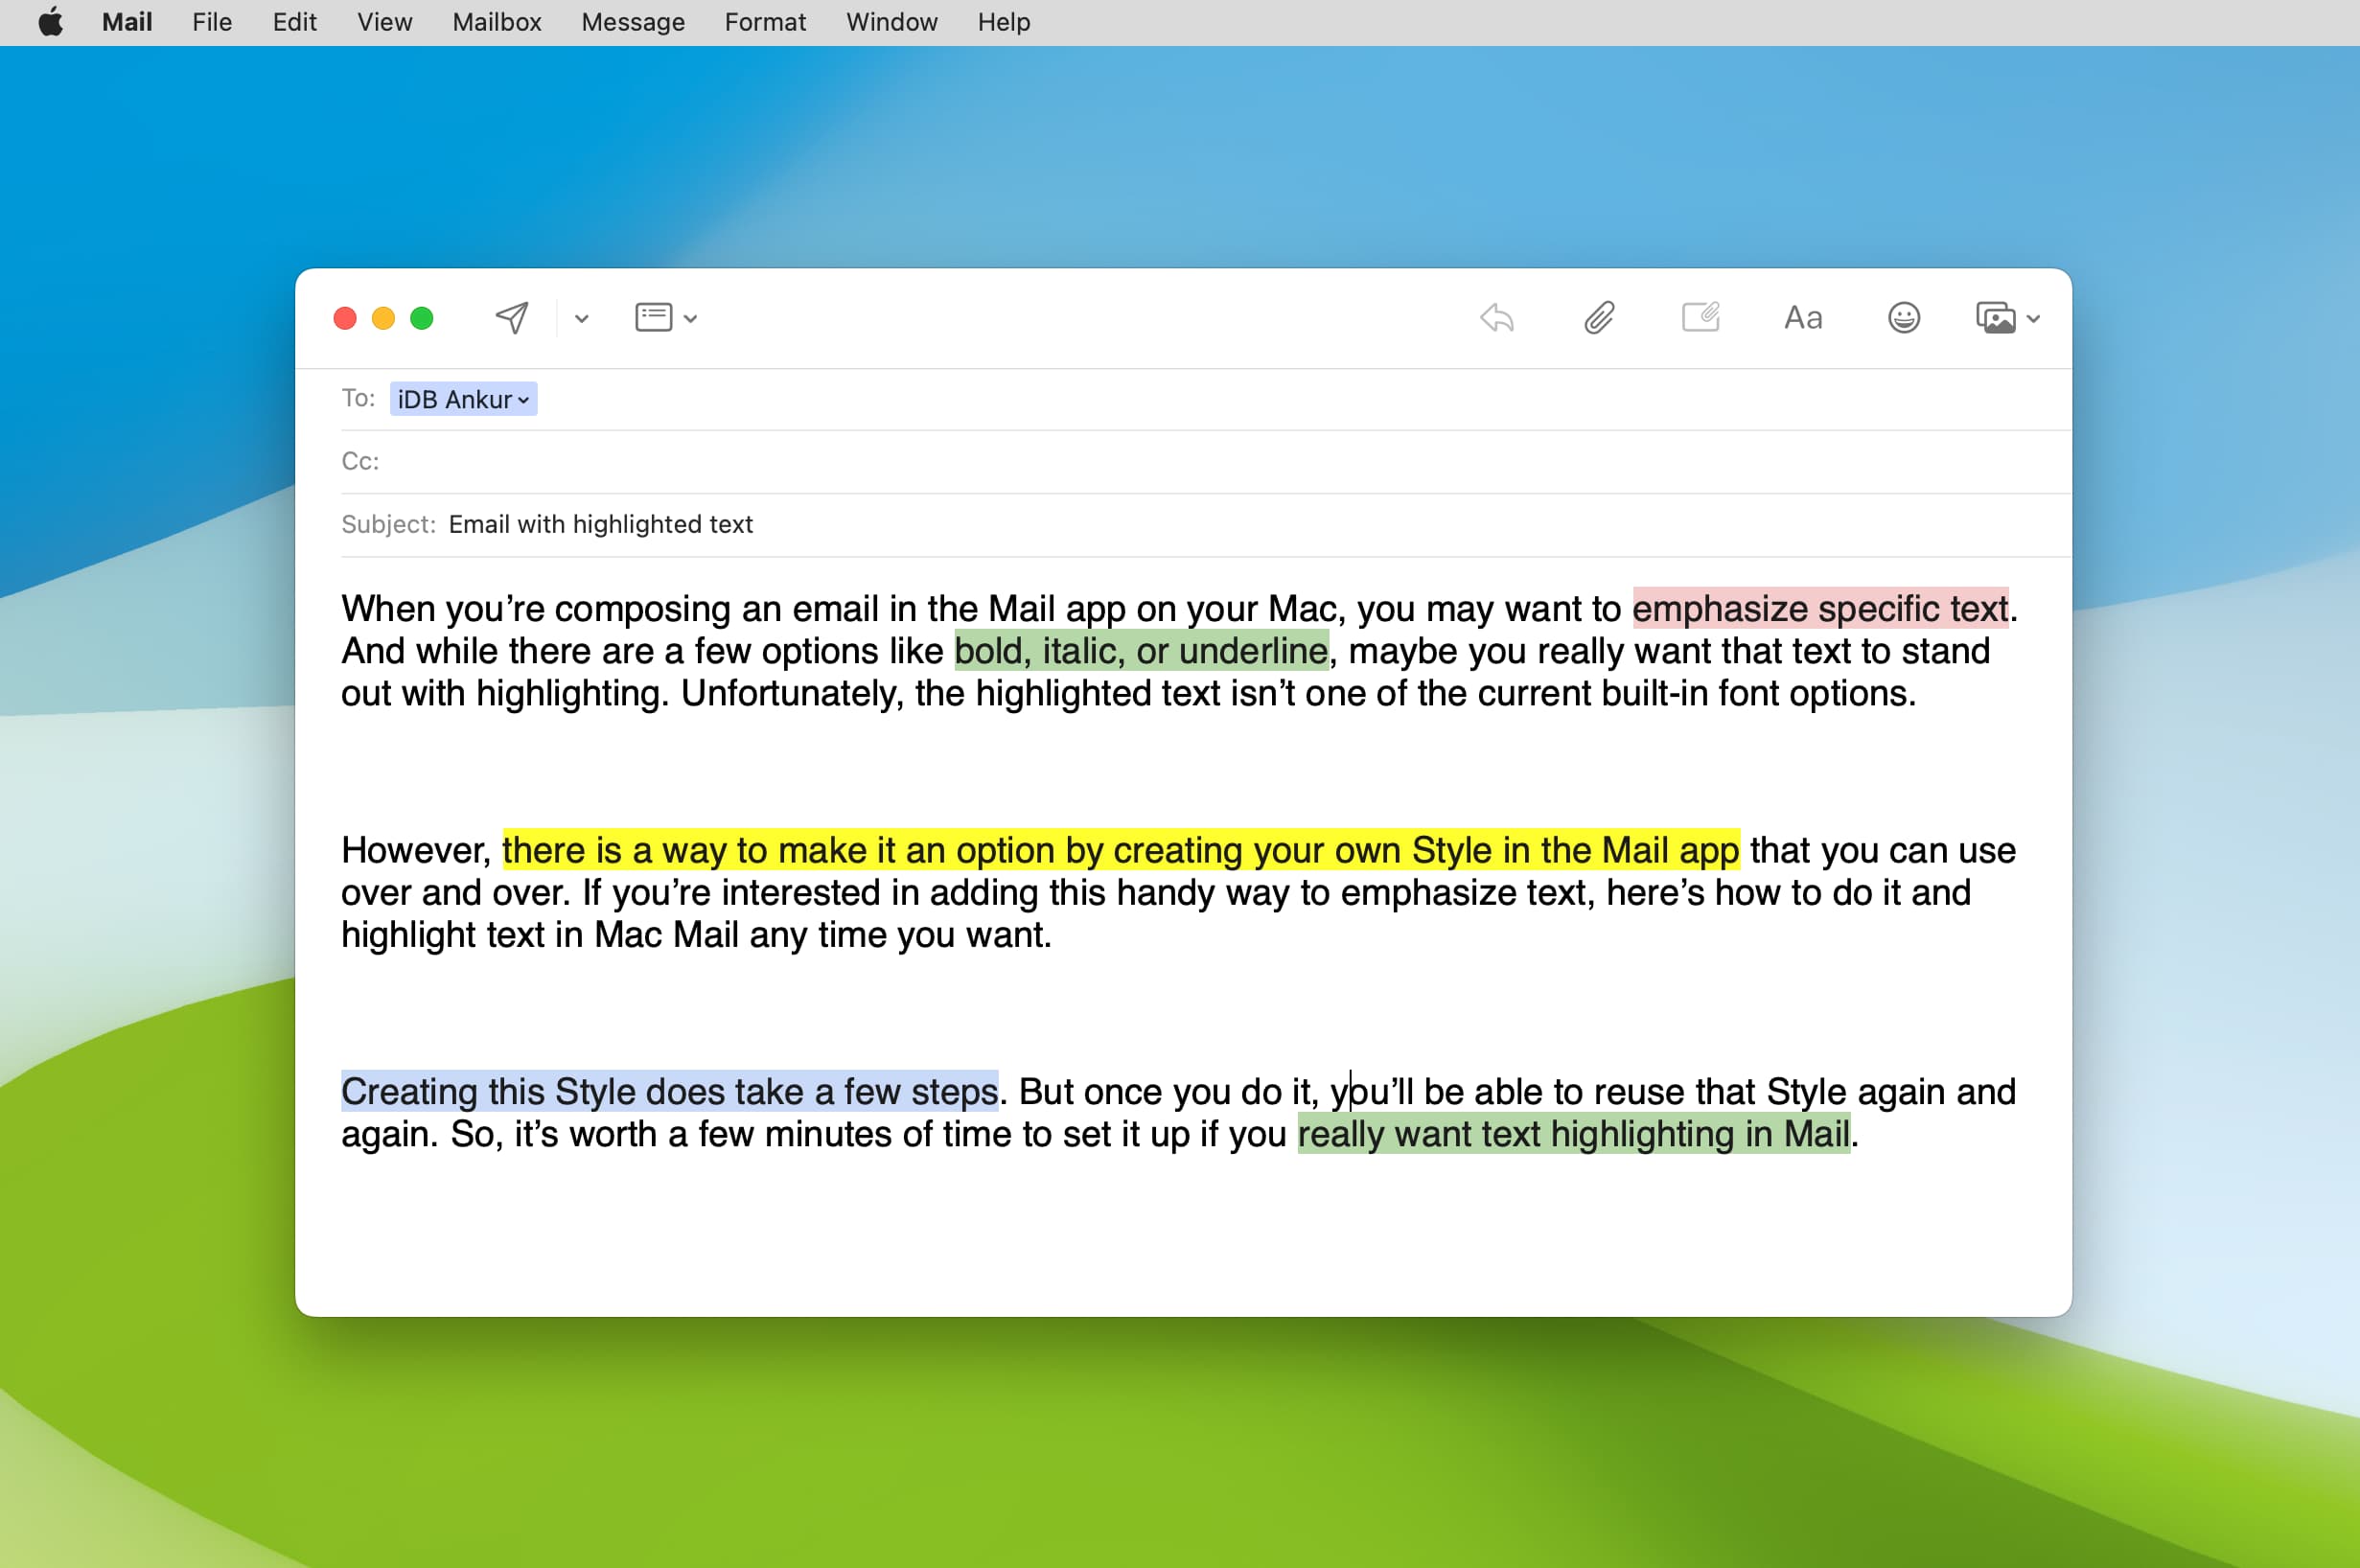 Highlight text in the Mail app on Mac